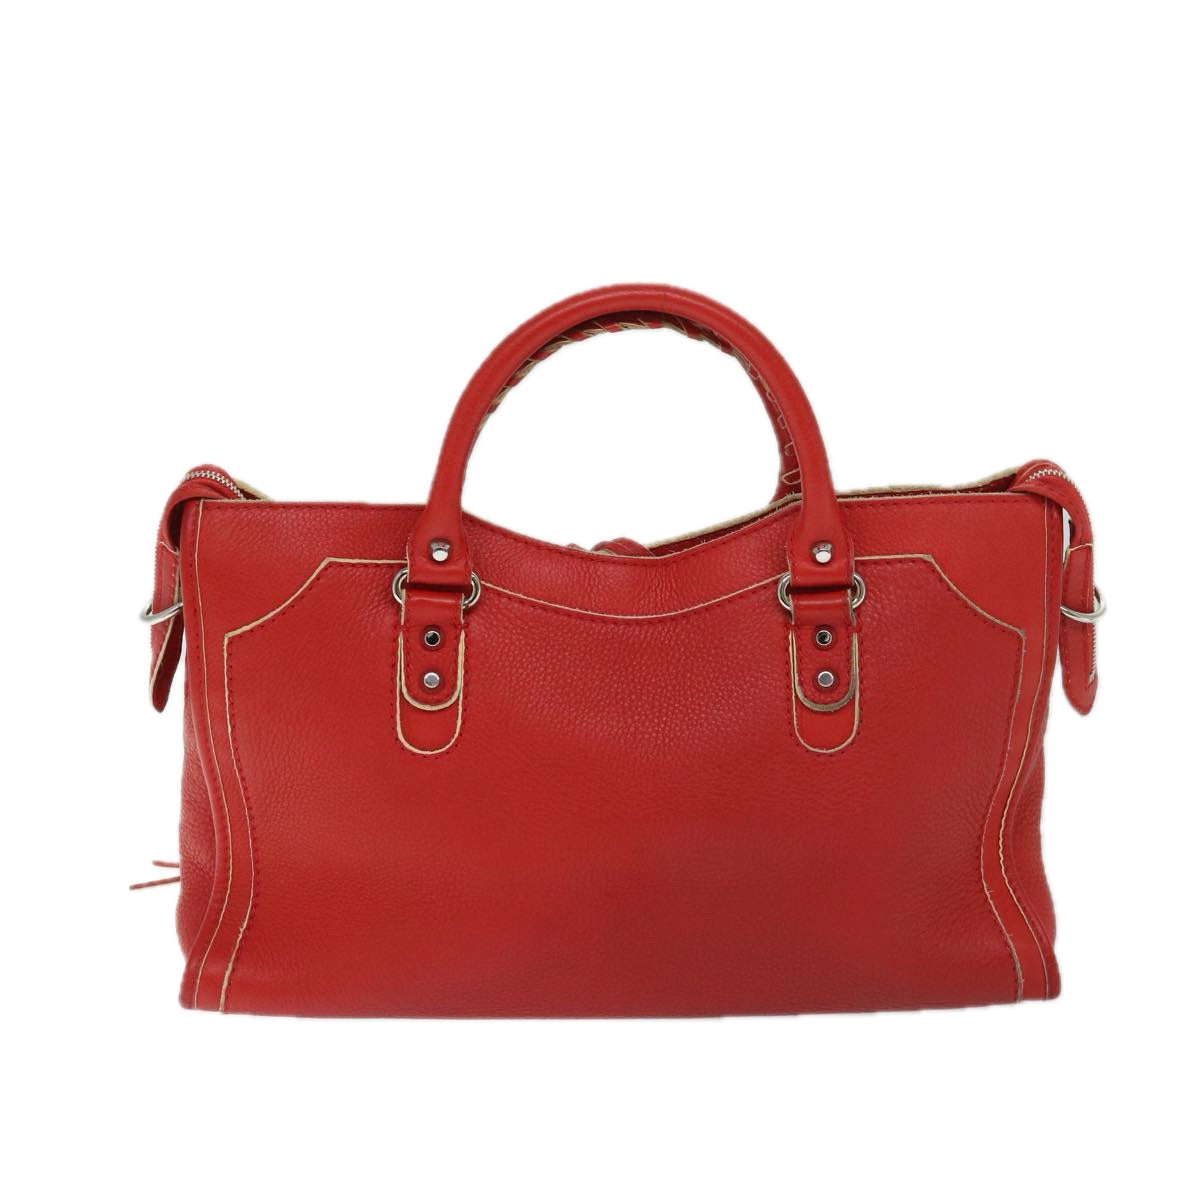 BALENCIAGA City Hand Bag Leather 2way Red 115748 Auth bs12559 - 0